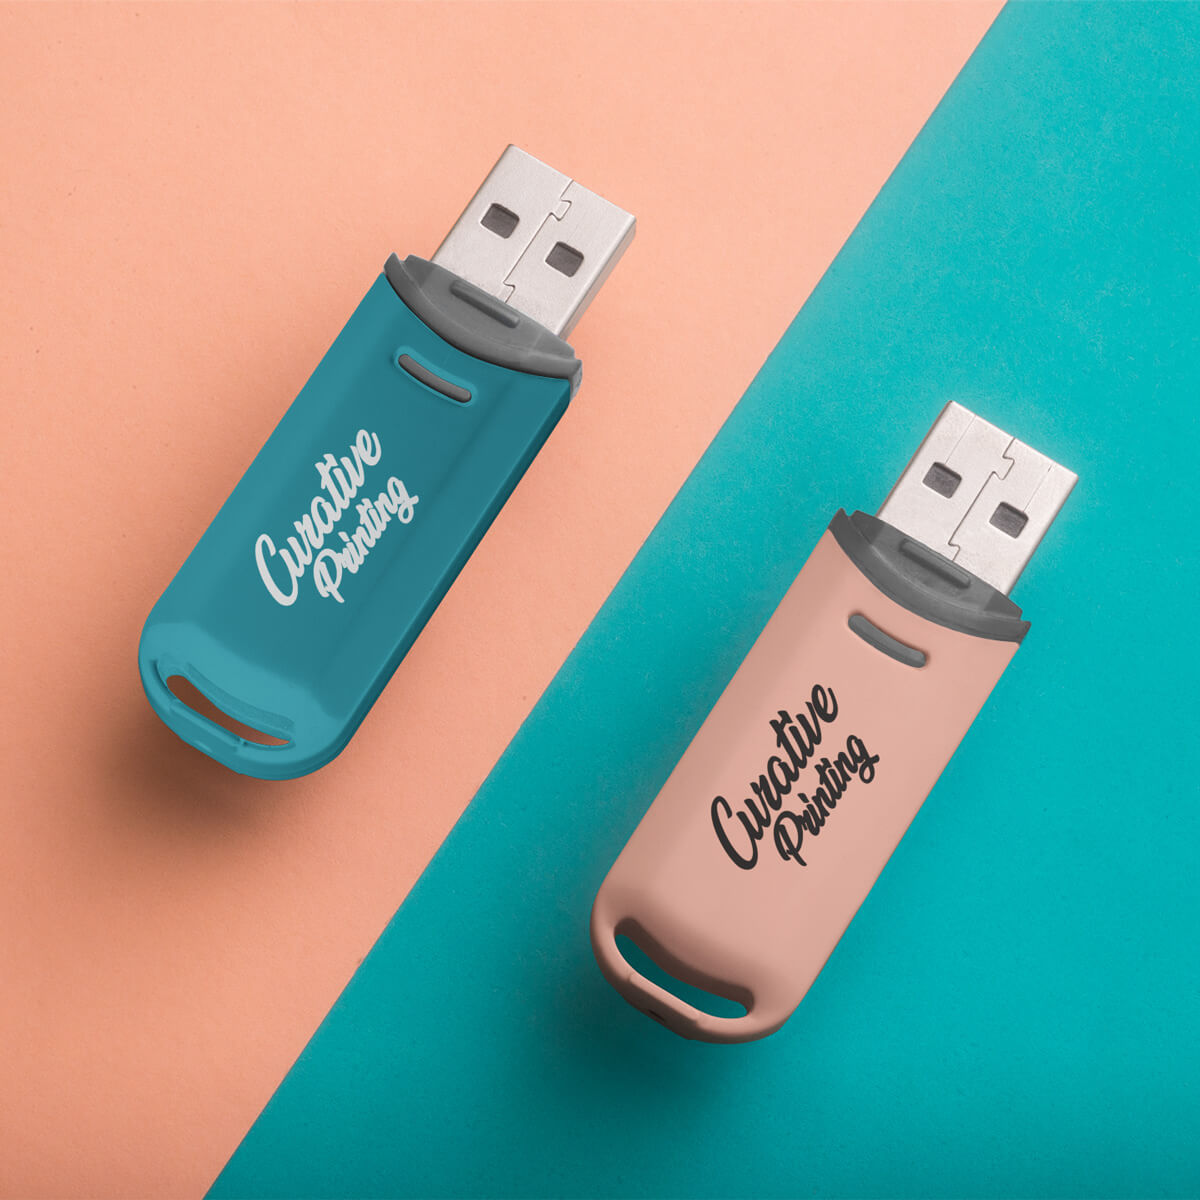 Turquoise and pink background with pink and turquoise USB flash drives promotional technology by curative printing